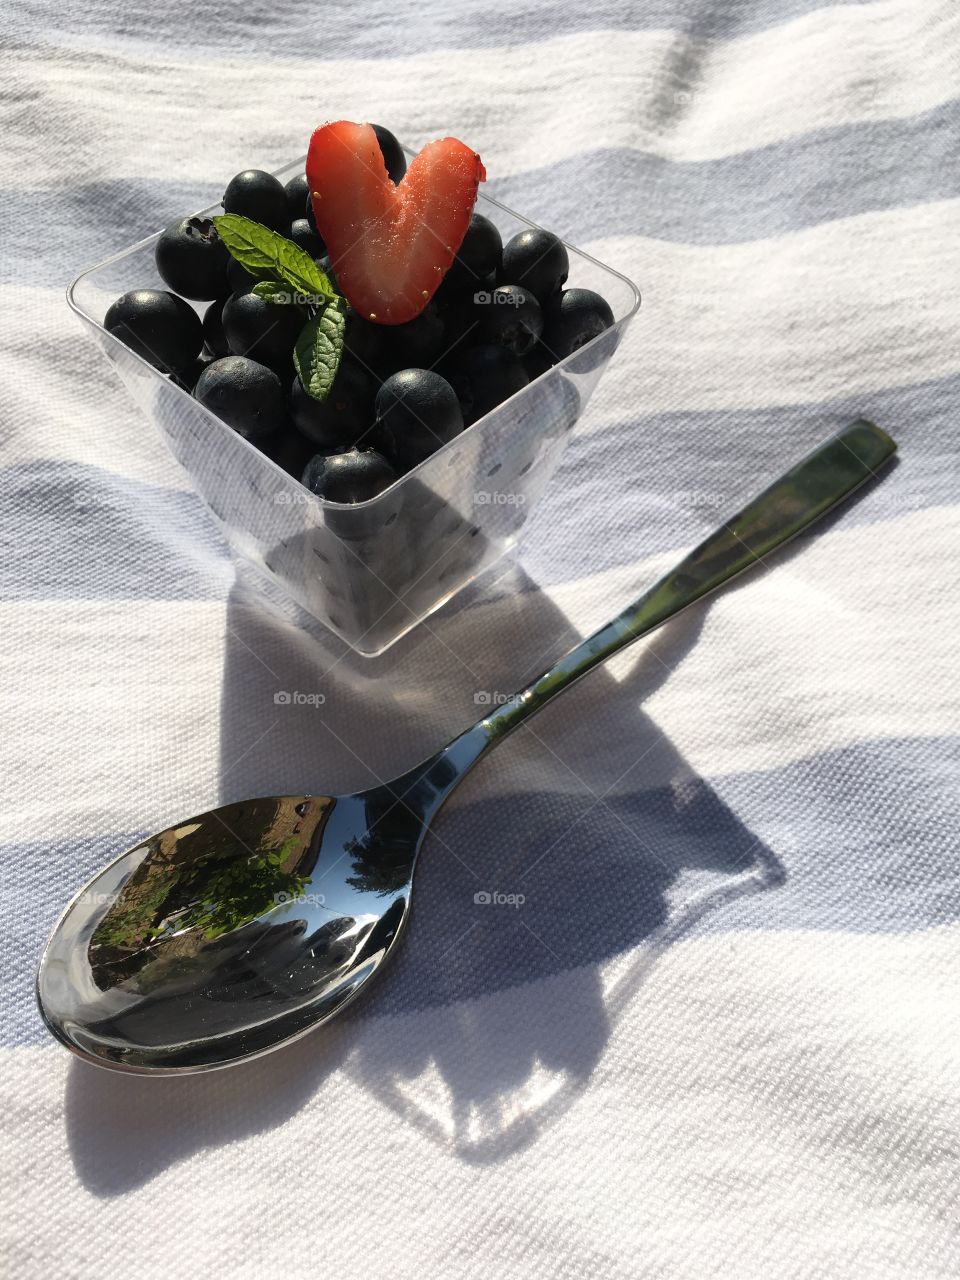 Square bowl full of blueberries with a heart shaped strawberry,sprig of mint and a spoon, outside in summer